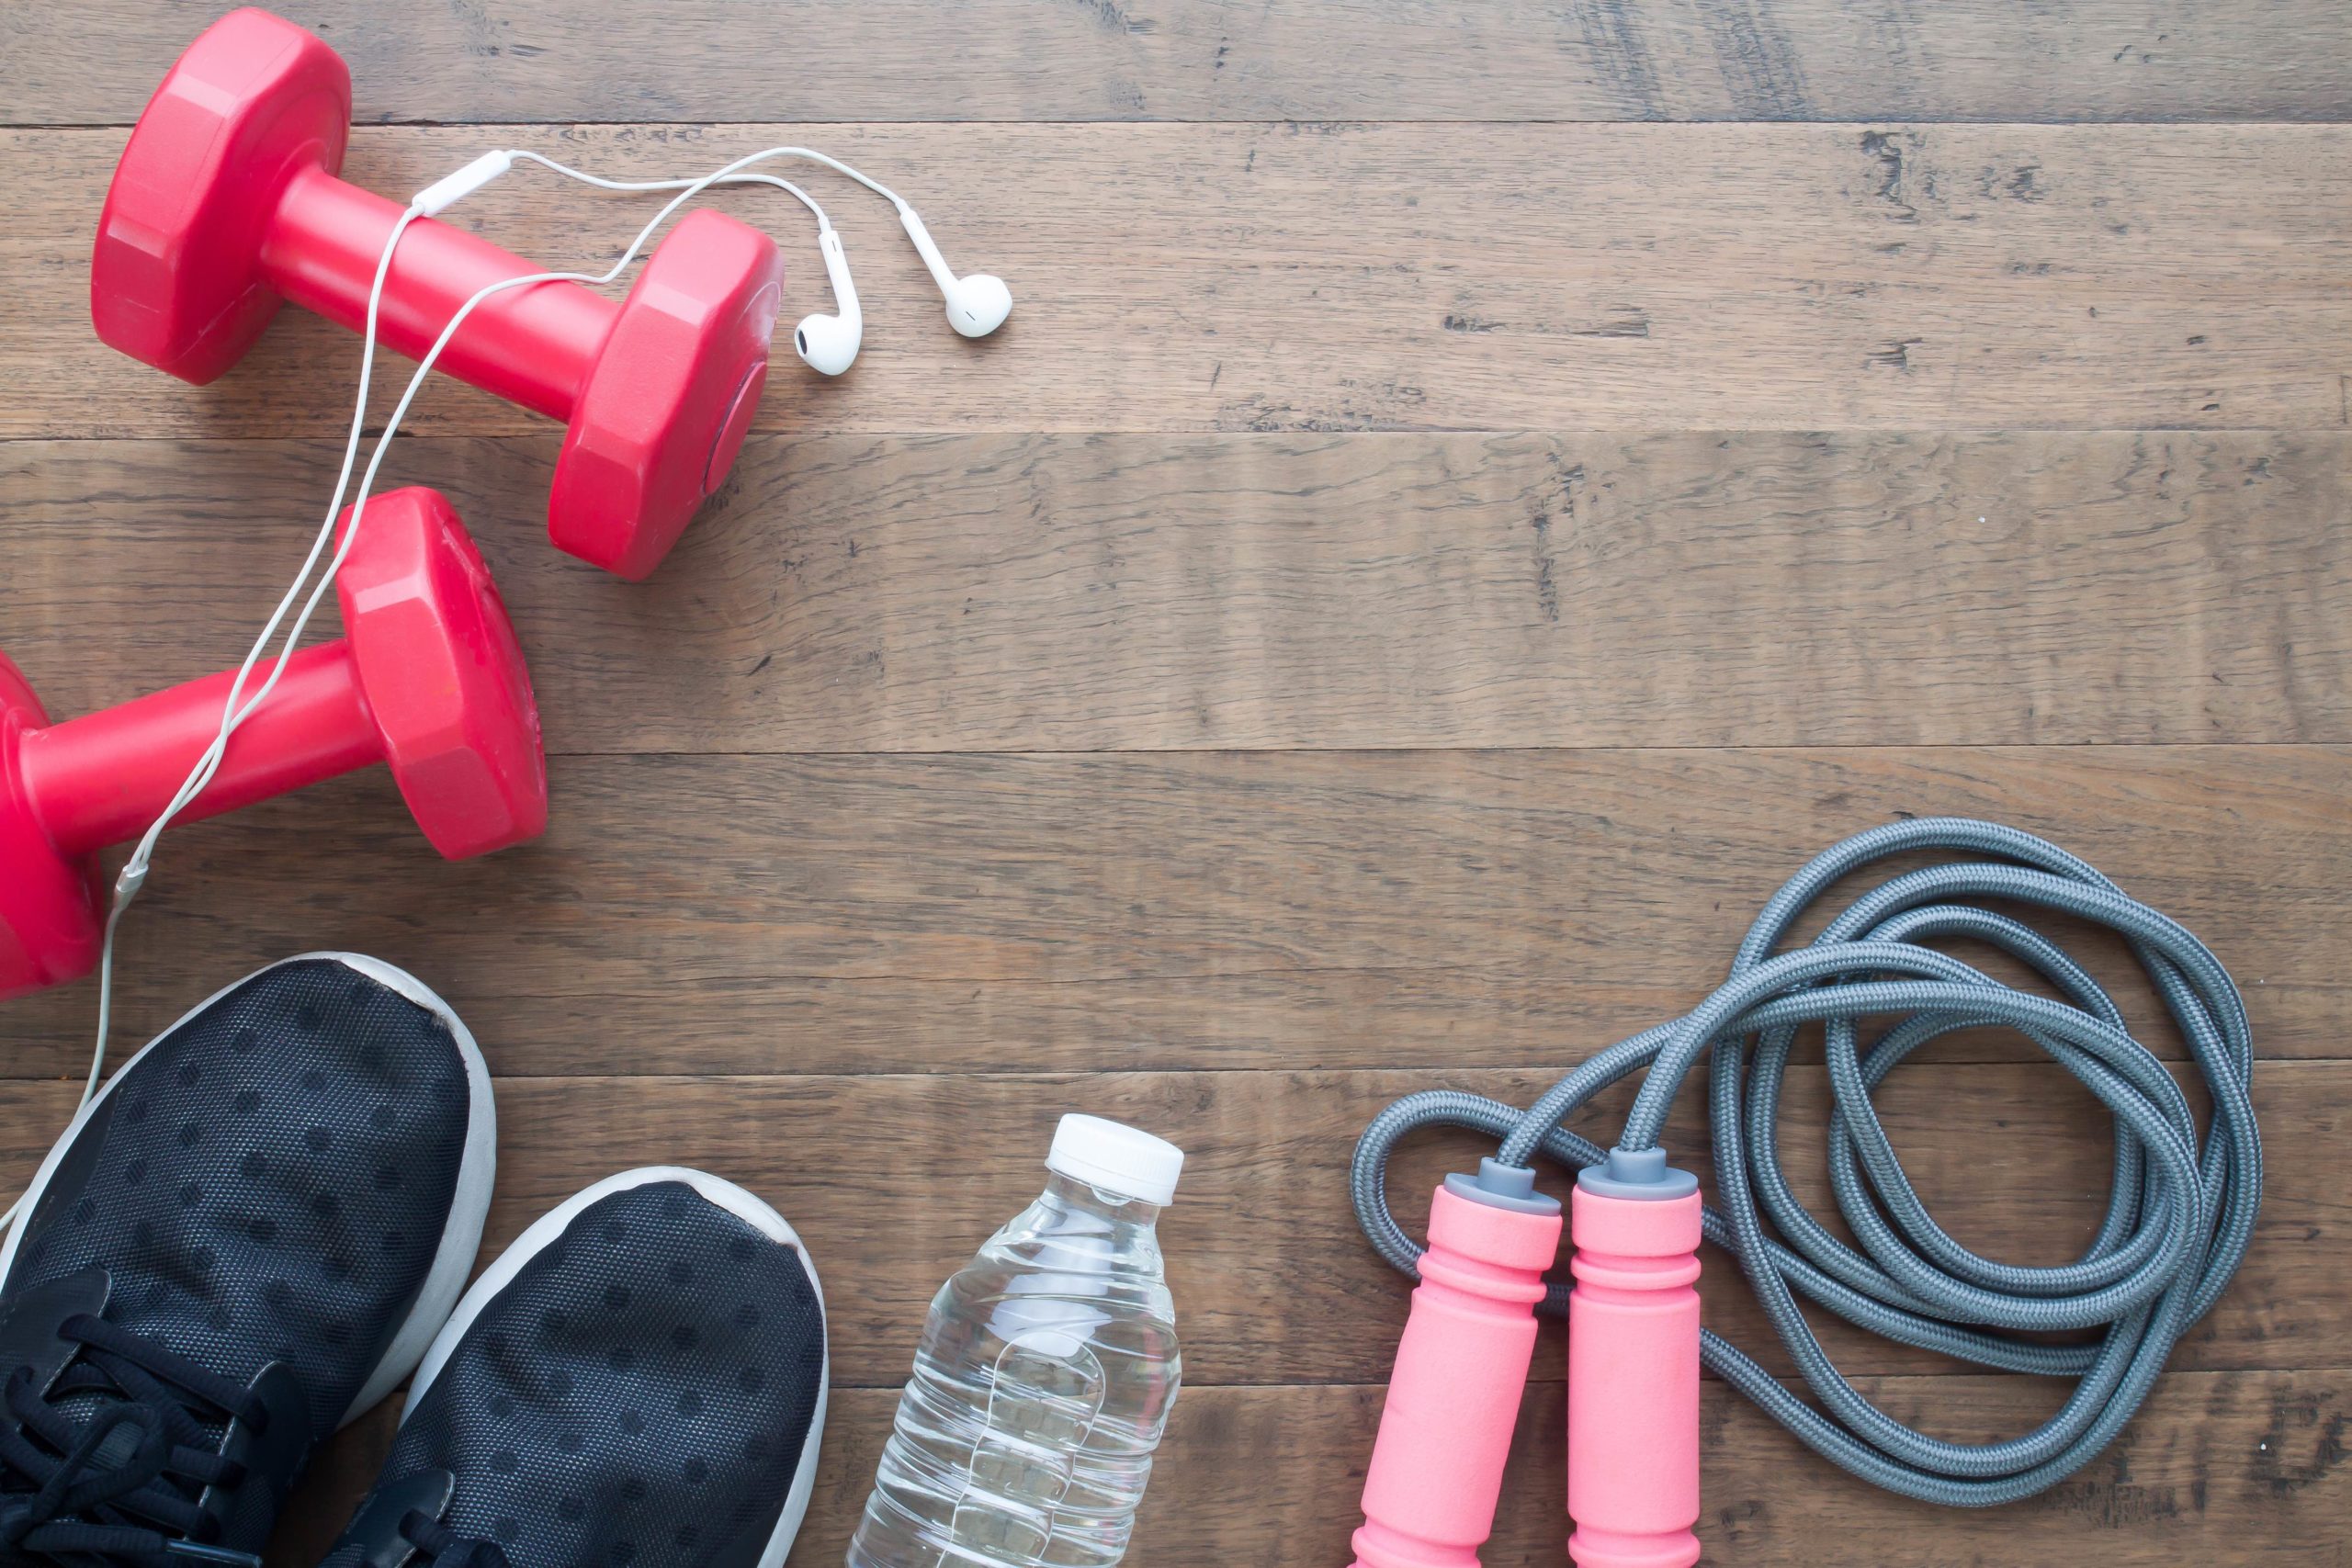 Sneakers, water bottle, jump road, dumbbells, headphones all on a wood floor ready for a home exercise